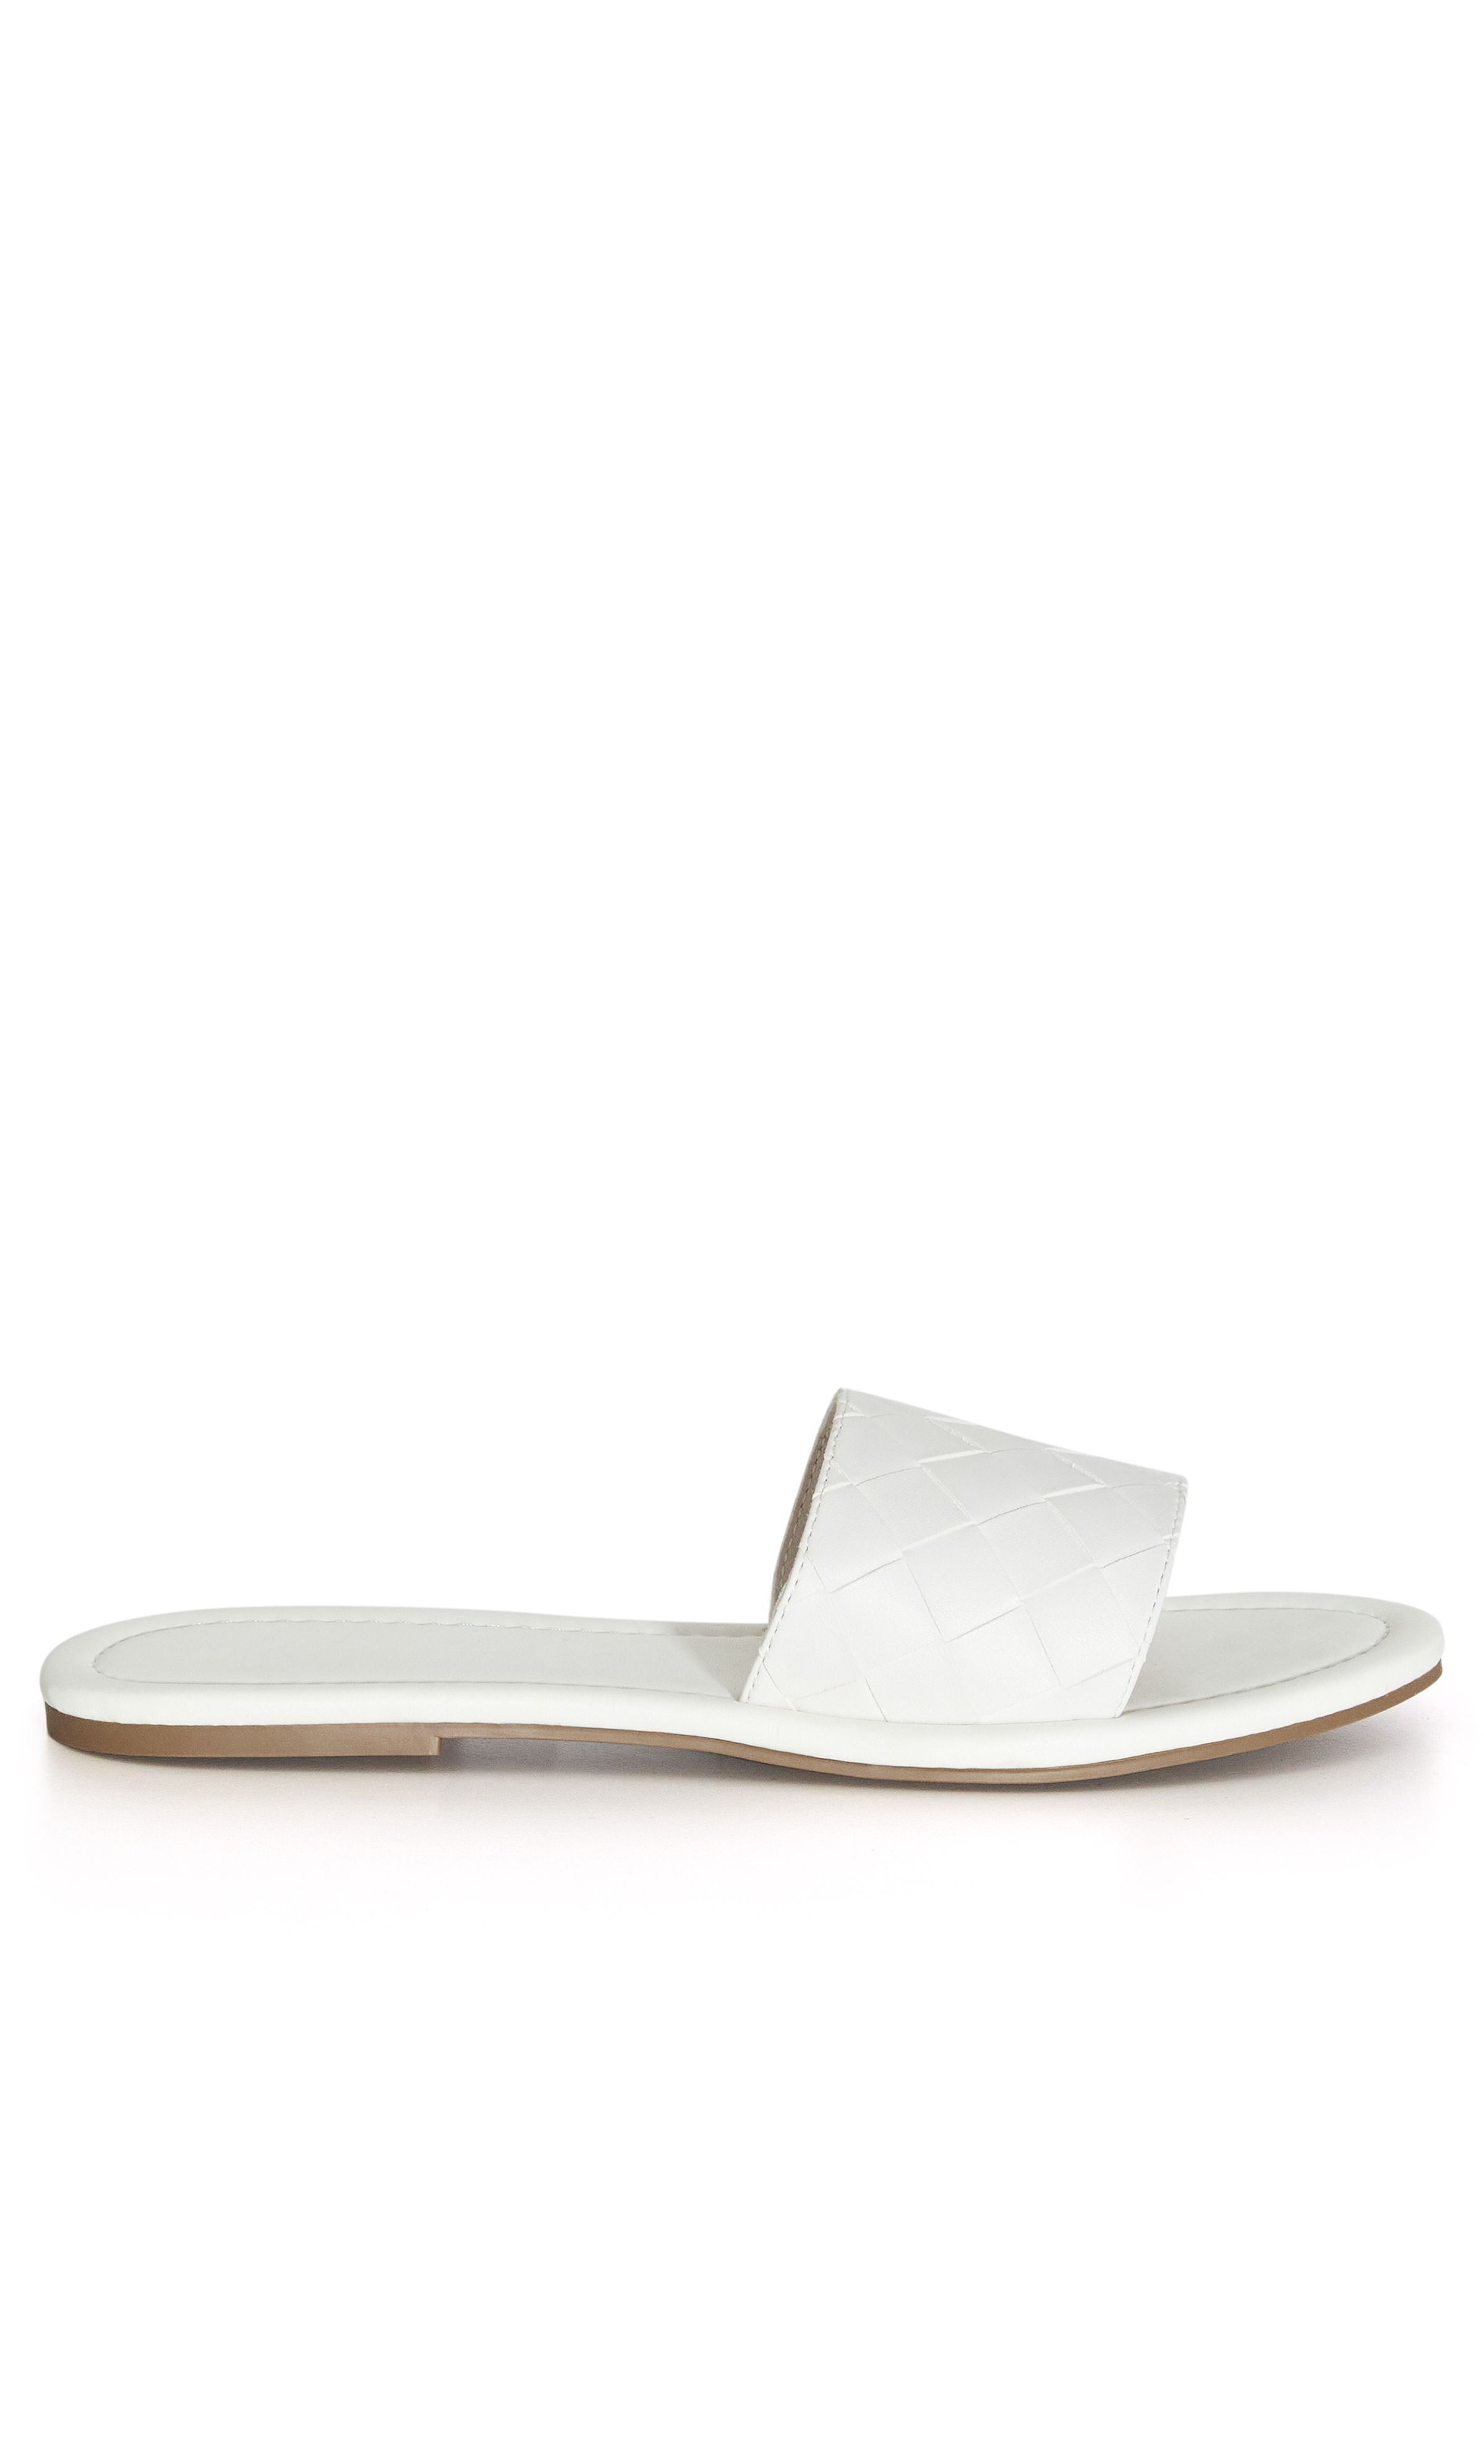 You can't go wrong with a pair of sleek slides! Our Weave Slide offers crisp white hue and woven detail, as well as an wide fit for added comfort. From laidback lunching to shopping dates and everything in between, these staple slides have you sorted. Key Features Include: - Round open toe - Slip on style - Faux leather upper - Woven detail Complete a flirty and feminine day look for rooftop drinks with the girls with your favourite floral mini dress and a round rattan bag.